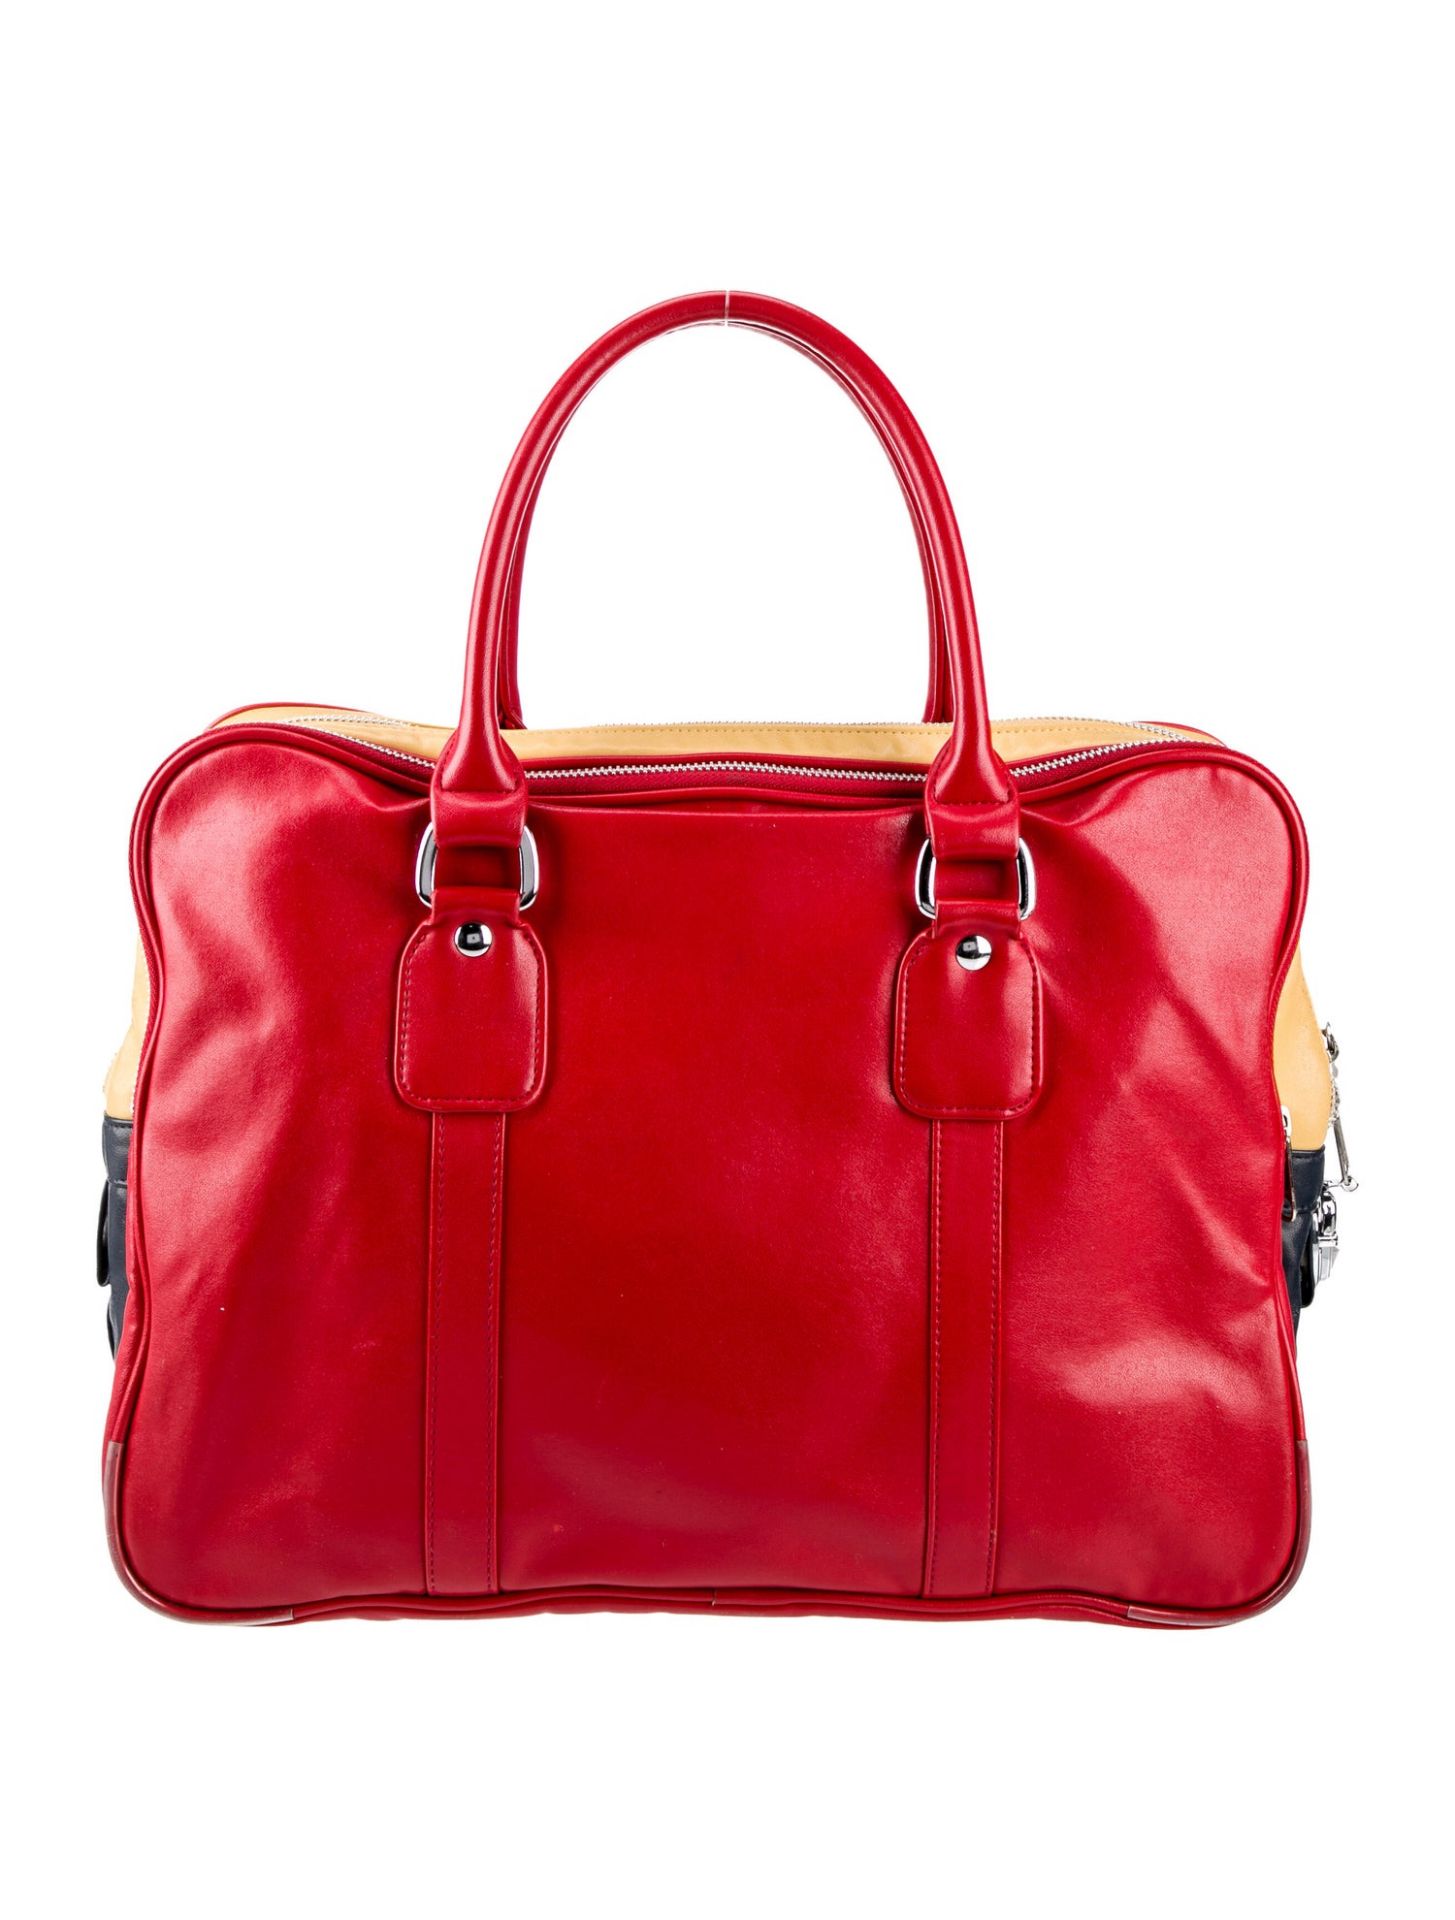 Comme Des GarÃ§ons Briefcase in Red Artificial Leather â€“ NEW â€“ RRP Â£175 ! - Image 6 of 9